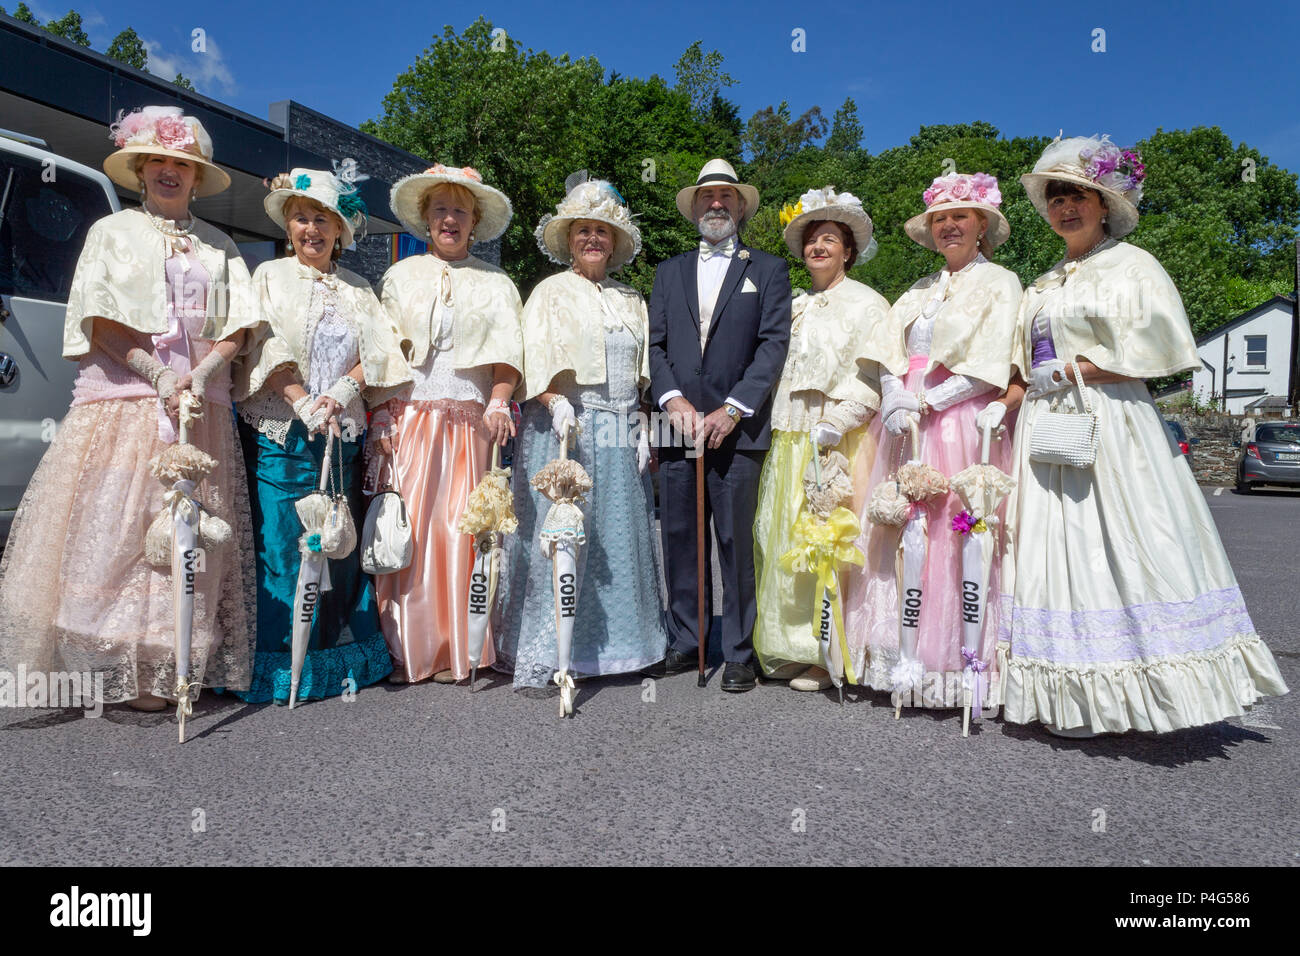 Skibbereen, West Cork, Ireland. 22ndJune, 2018. A scorching hot day here in West Cork with the sun blazing in a clear blue sky, unfortunately the ladies of the Cobh Animation Team are definitely not dressed for the beach in their Victorian vintage Costumes or Dresses!Credit: aphperspective/Alamy Live News Stock Photo